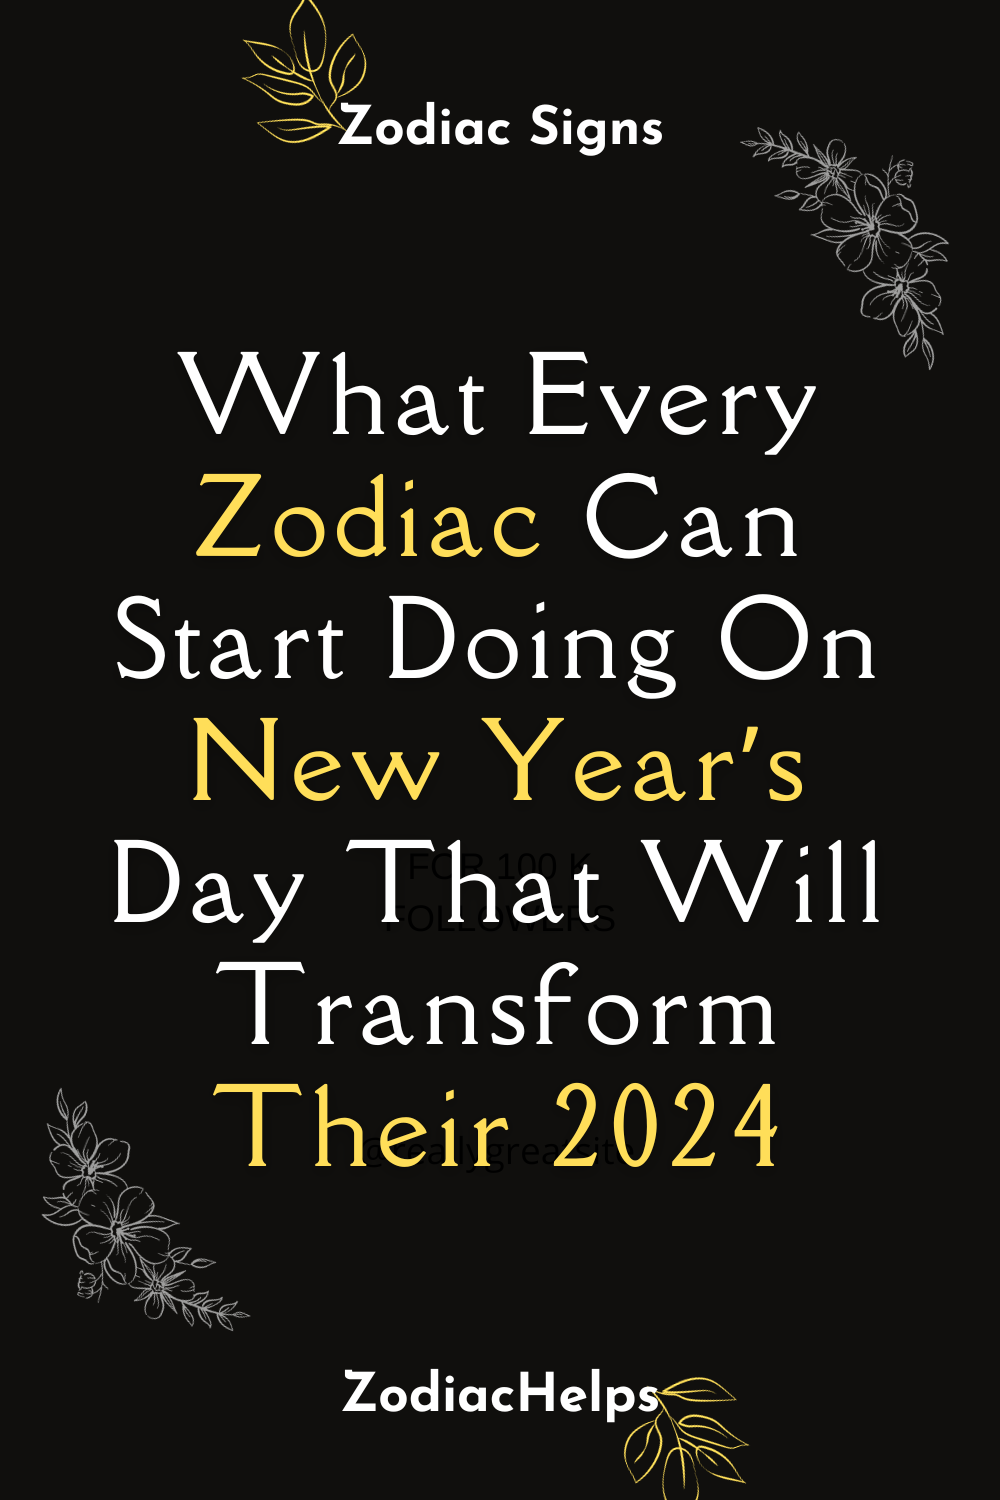 What Every Zodiac Can Start Doing On New Year’s Day That Will Transform Their 2024